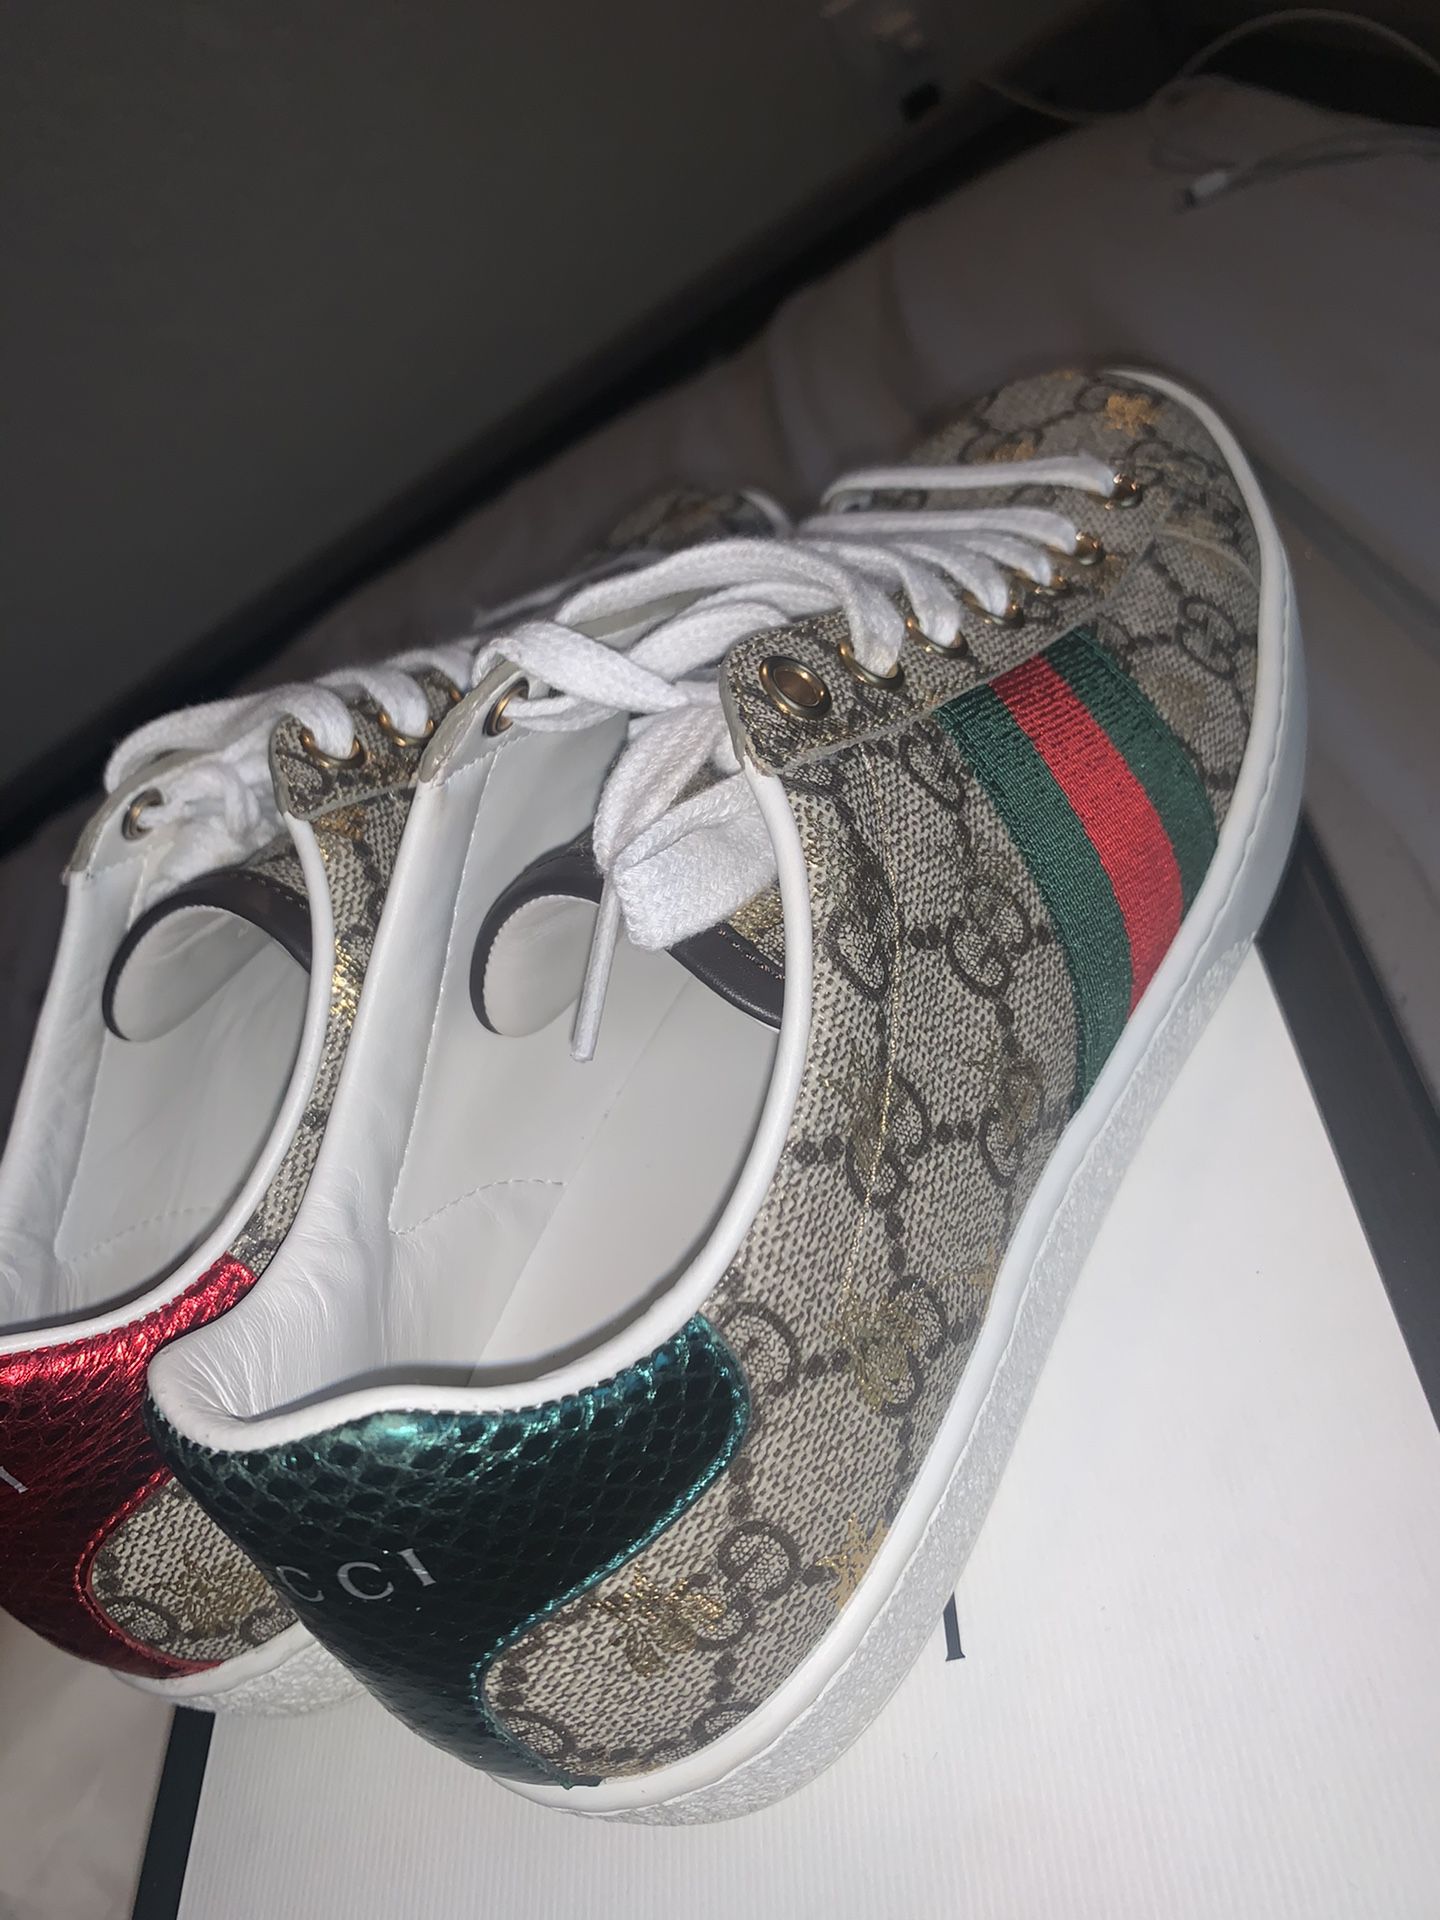 Womens Gucci shoes